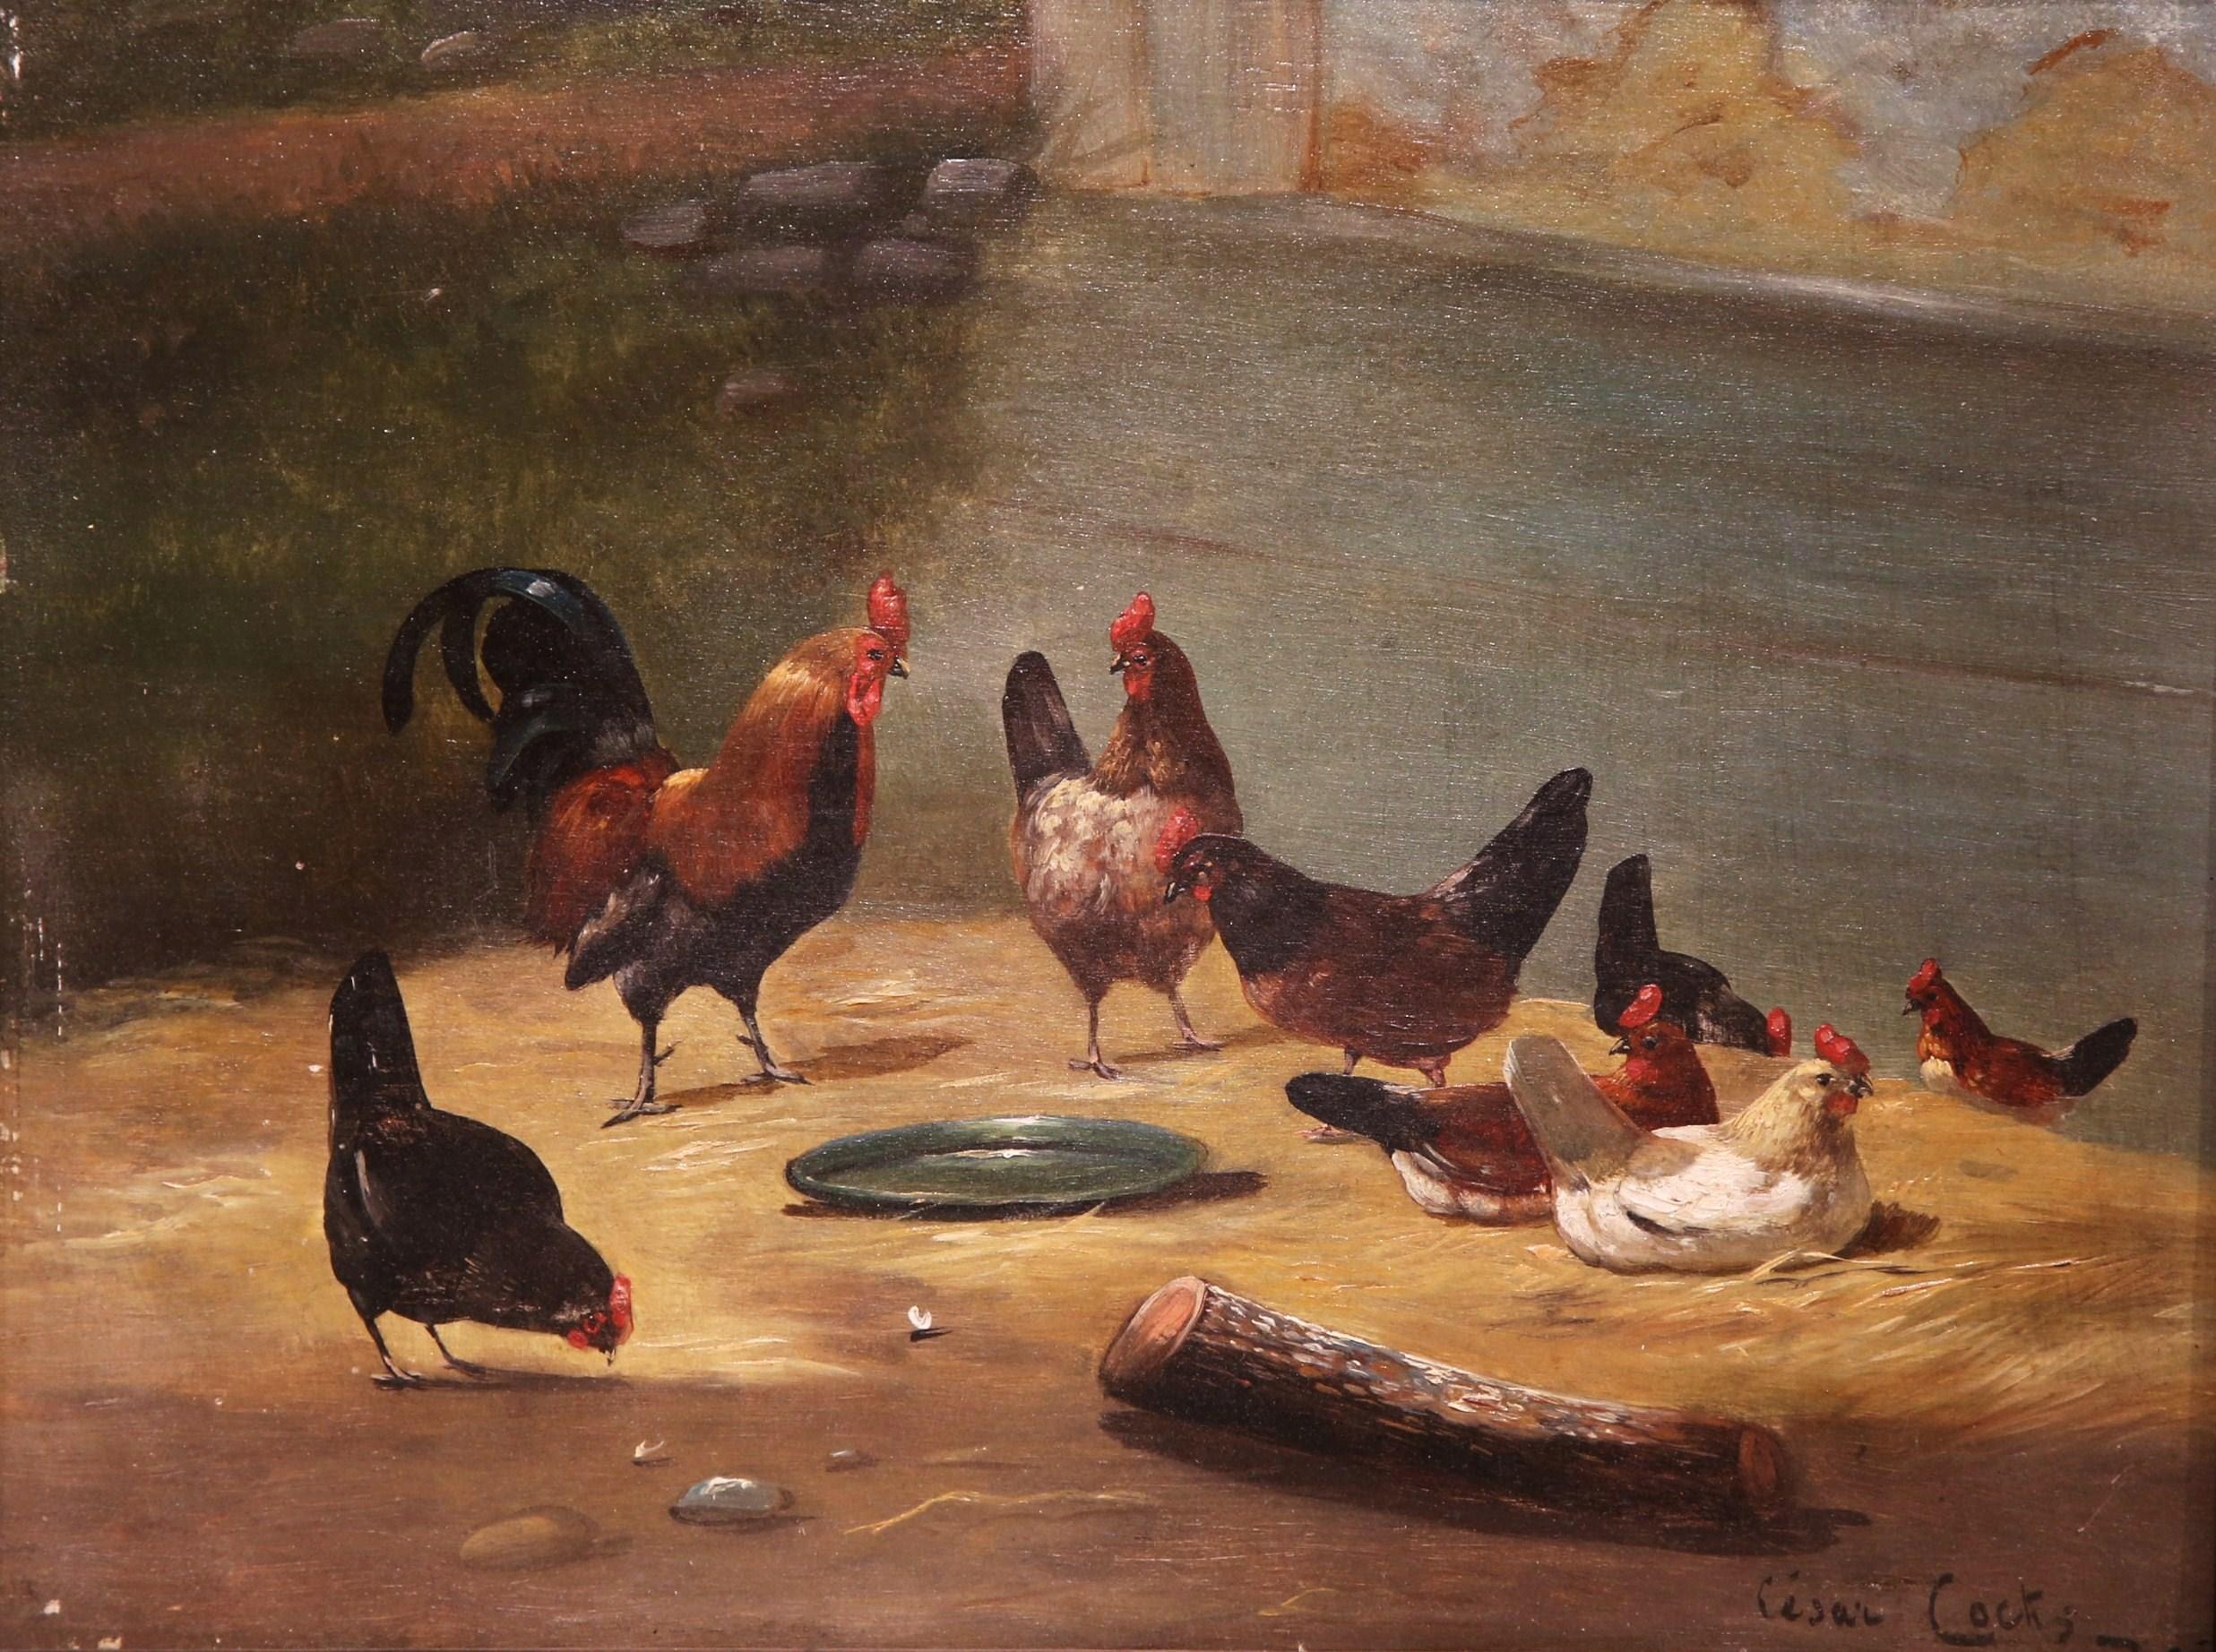 This colorful antique painting was painted in France, circa 1870 and is signed on the bottom right by Cesar Cocks. The bucolic, colorful scene of chickens and roosters grazing in a barnyard is set in its original carved, gold leaf frame. The